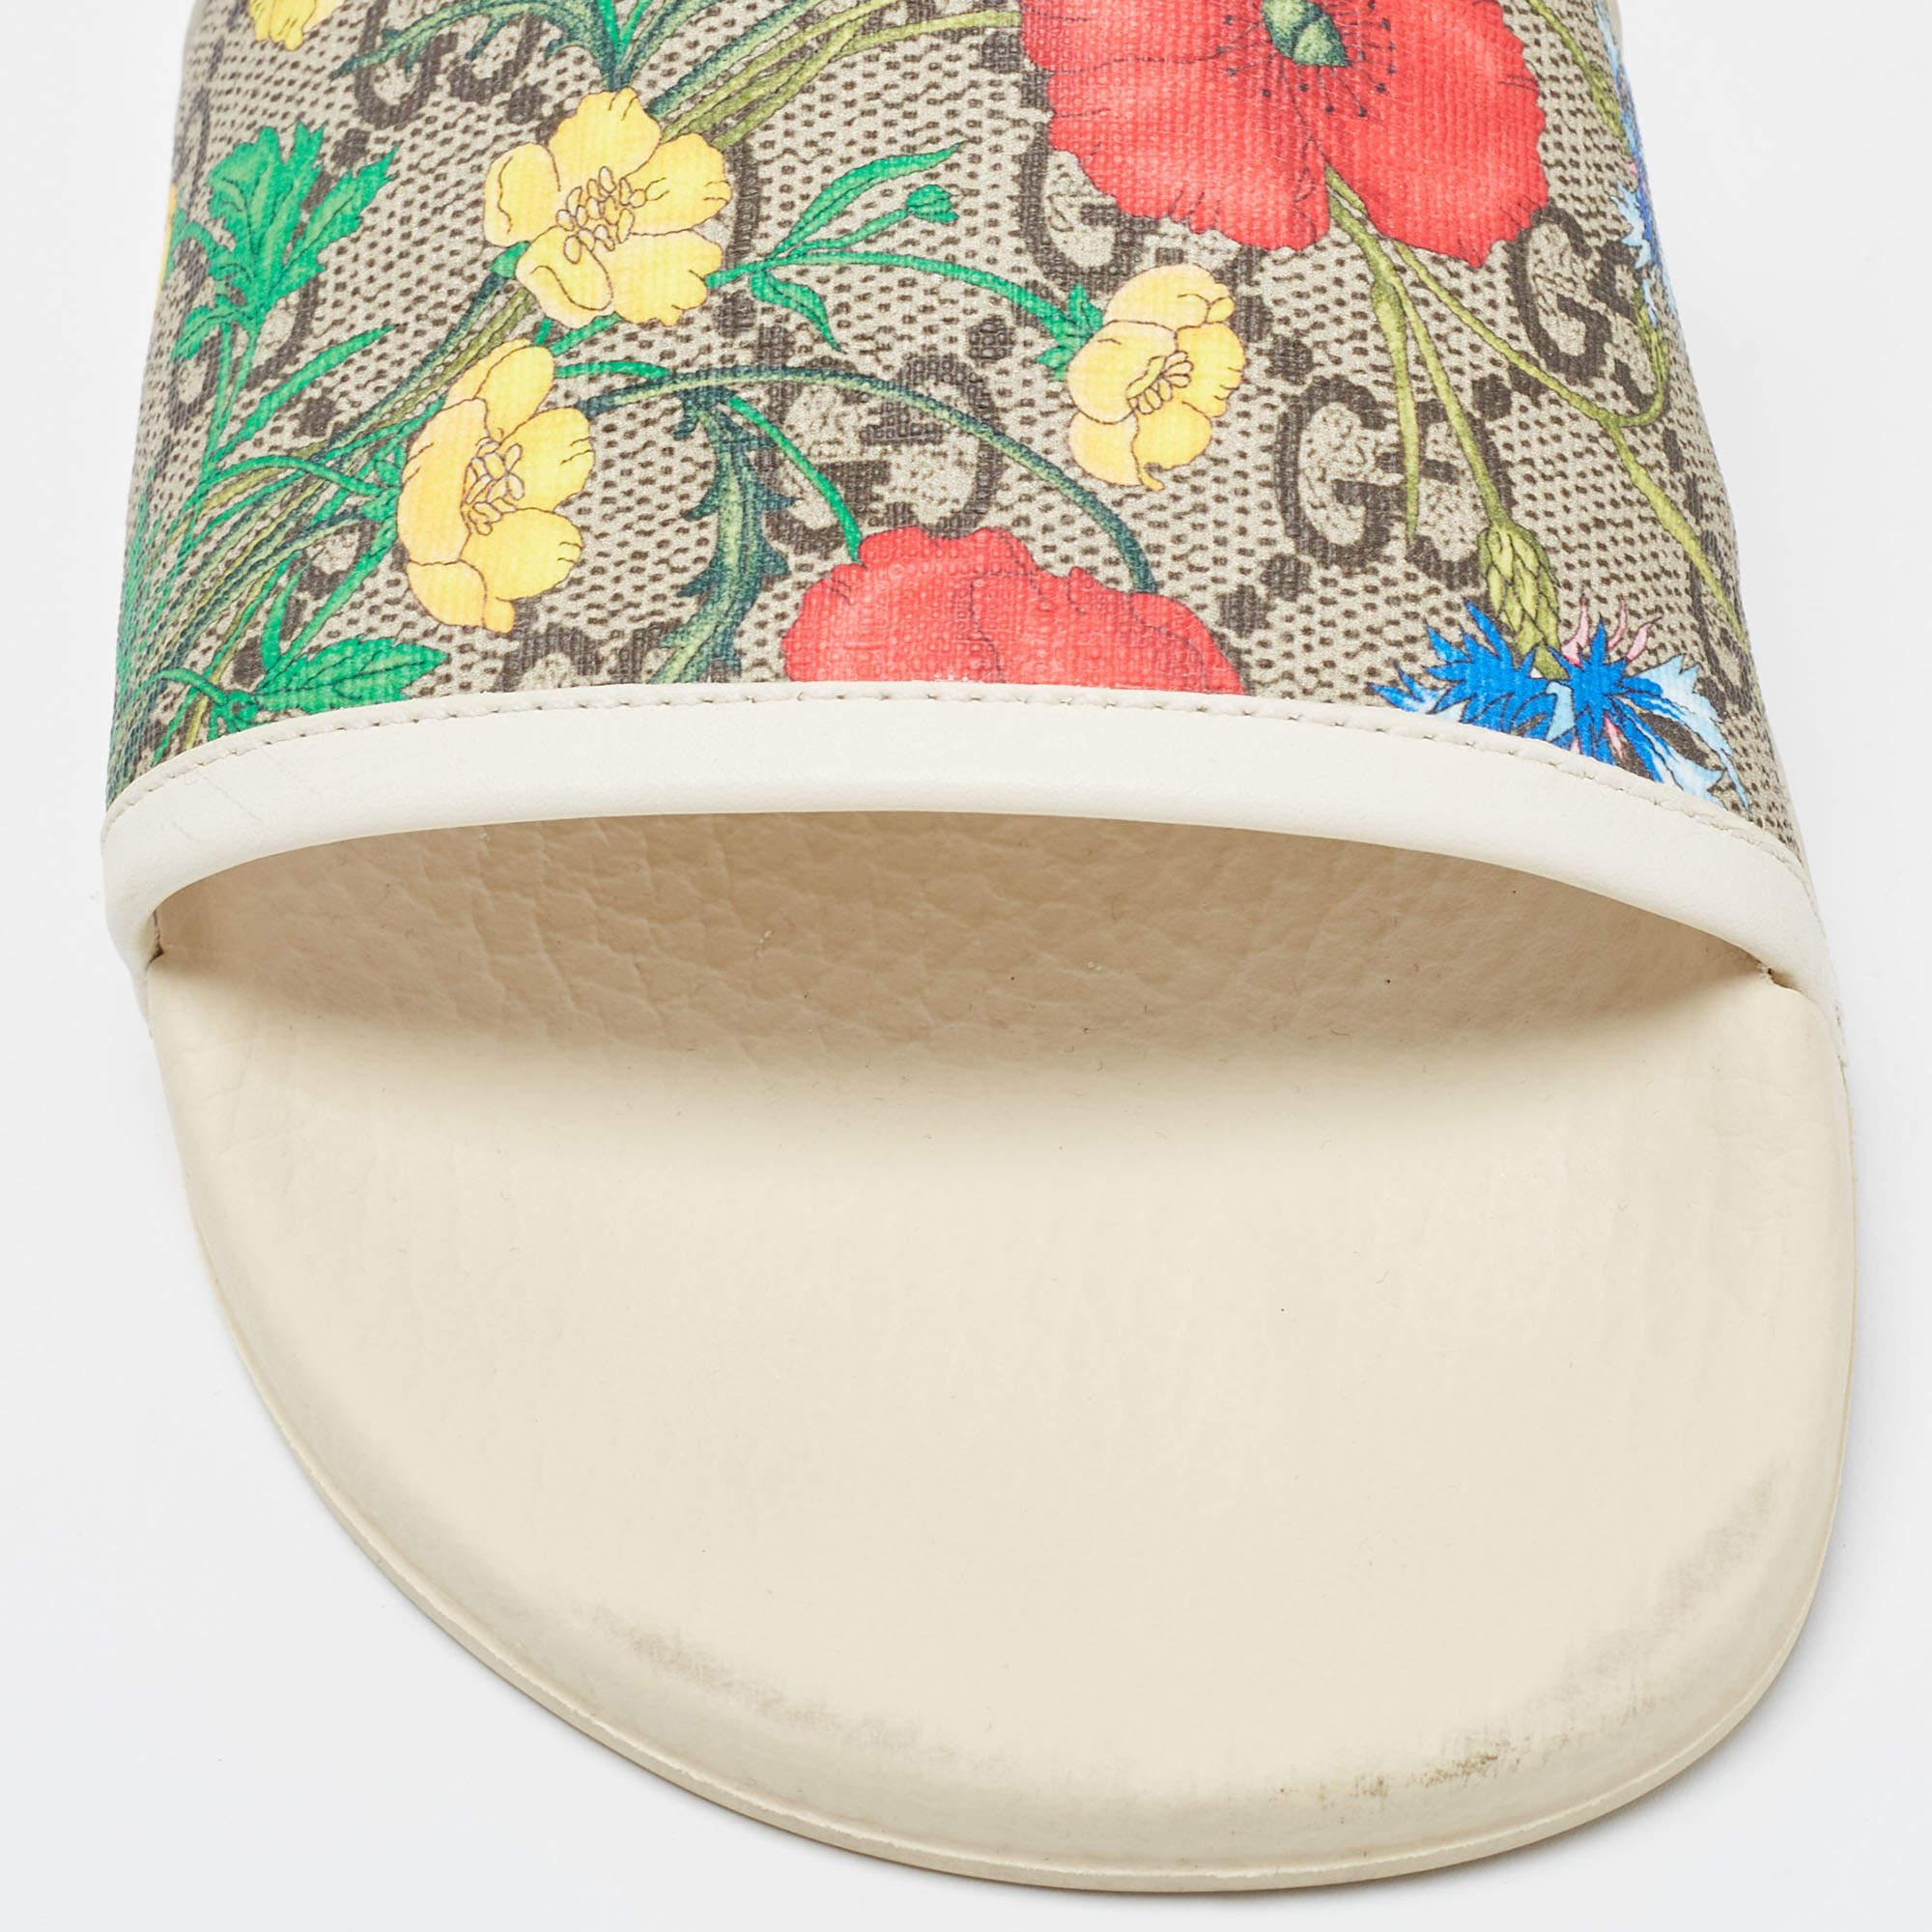 Gucci's slides for women have GG Supreme canvas with Blooms print on the uppers. They're perfect for the beach, vacation days, or everyday use.

